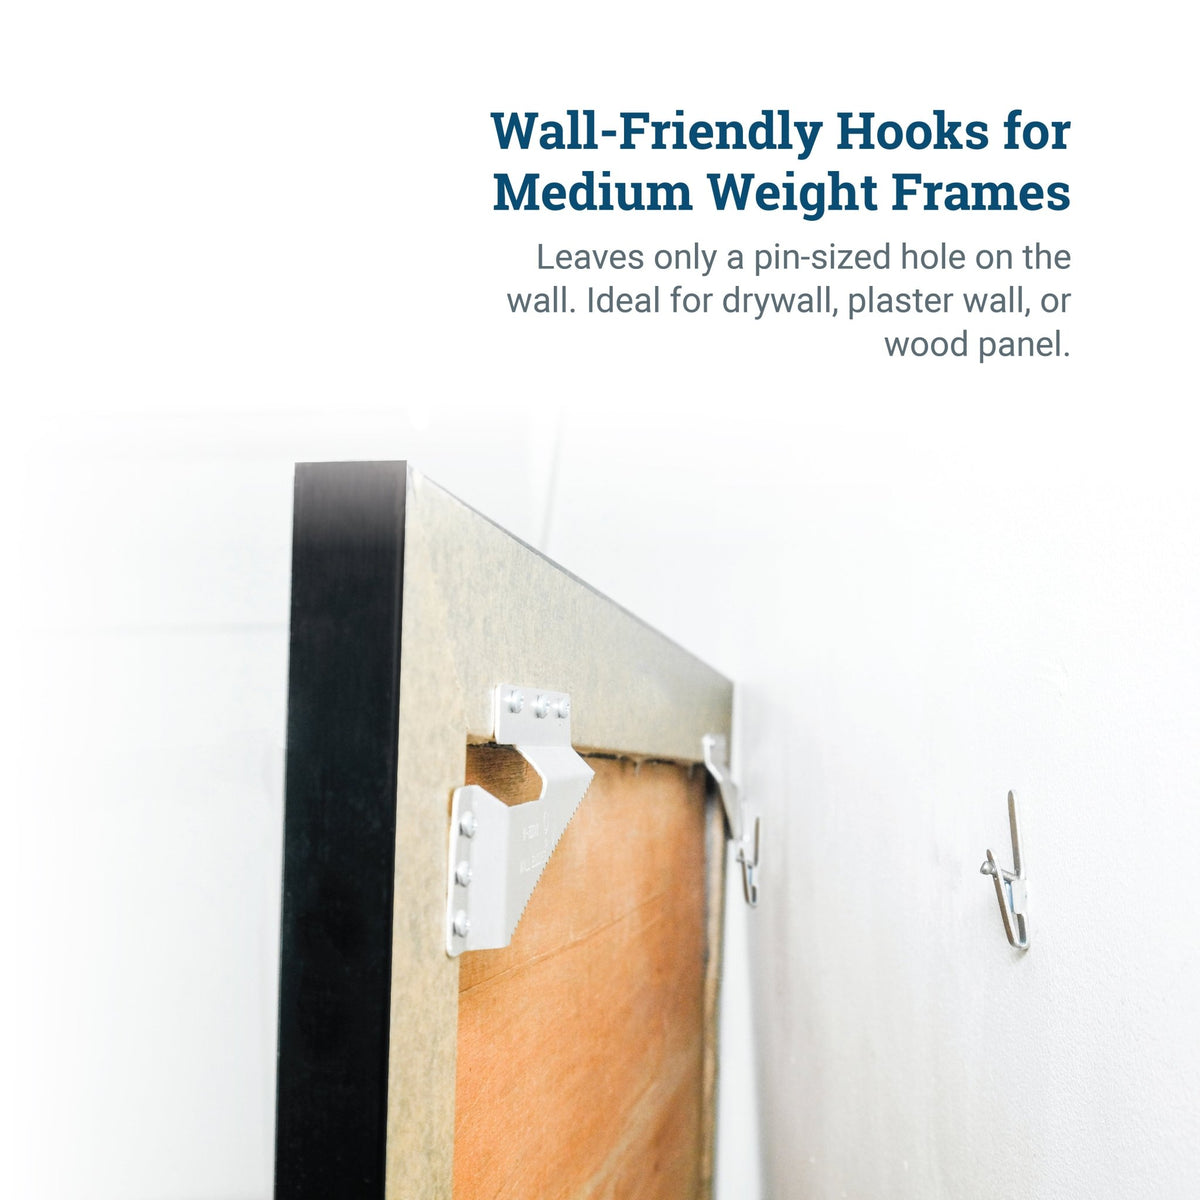 Replacement Hook/Nail Pair for Large Wall Buddies - WB-HookLg - Picture Hang Solutions